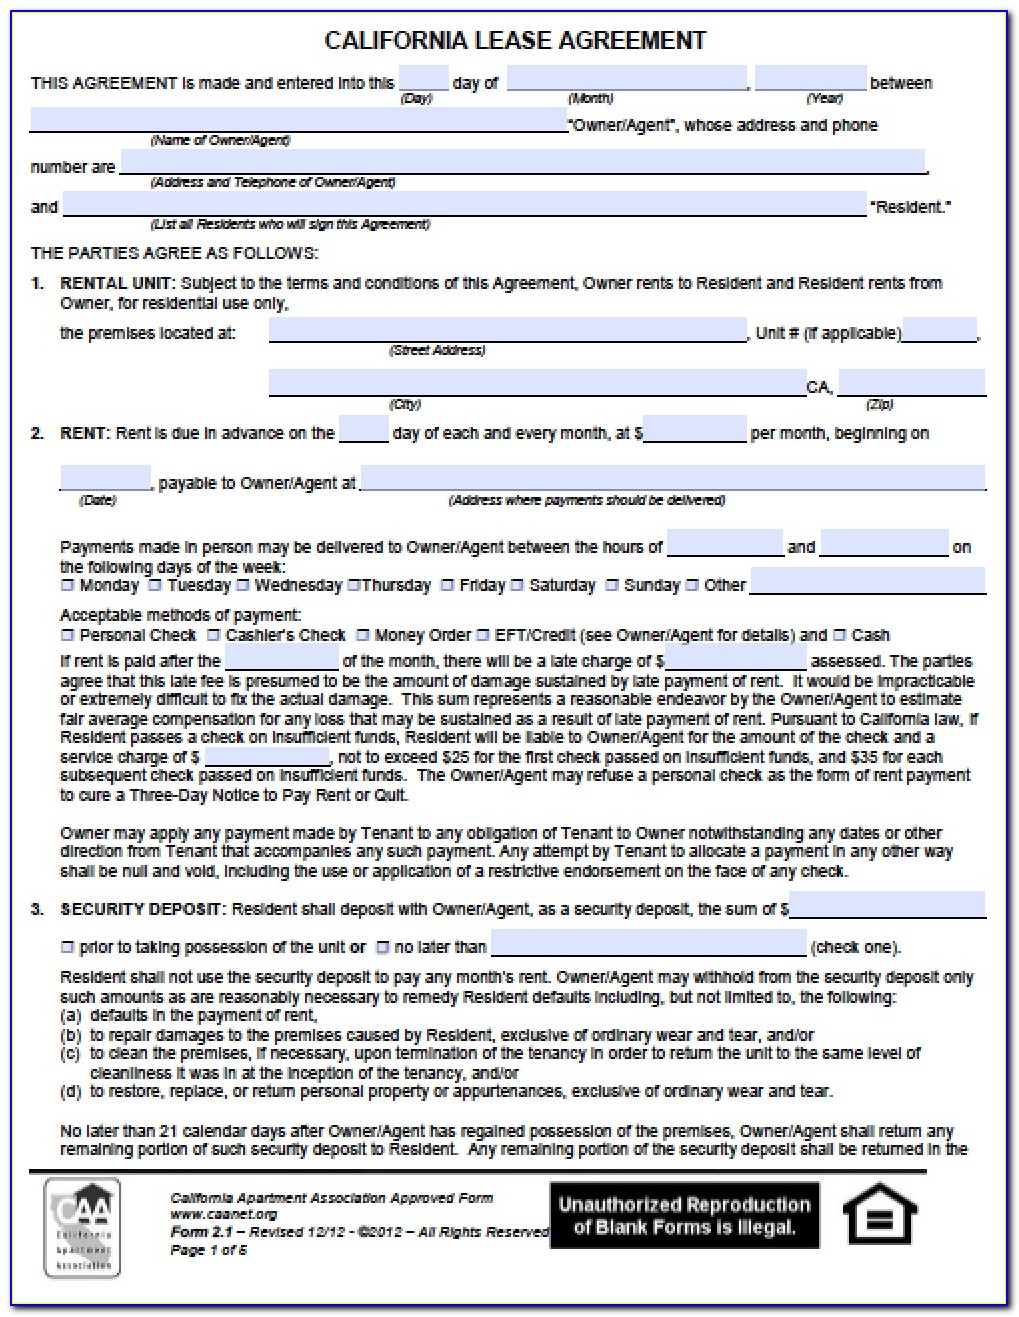 California Residential Lease Agreement Blank Form